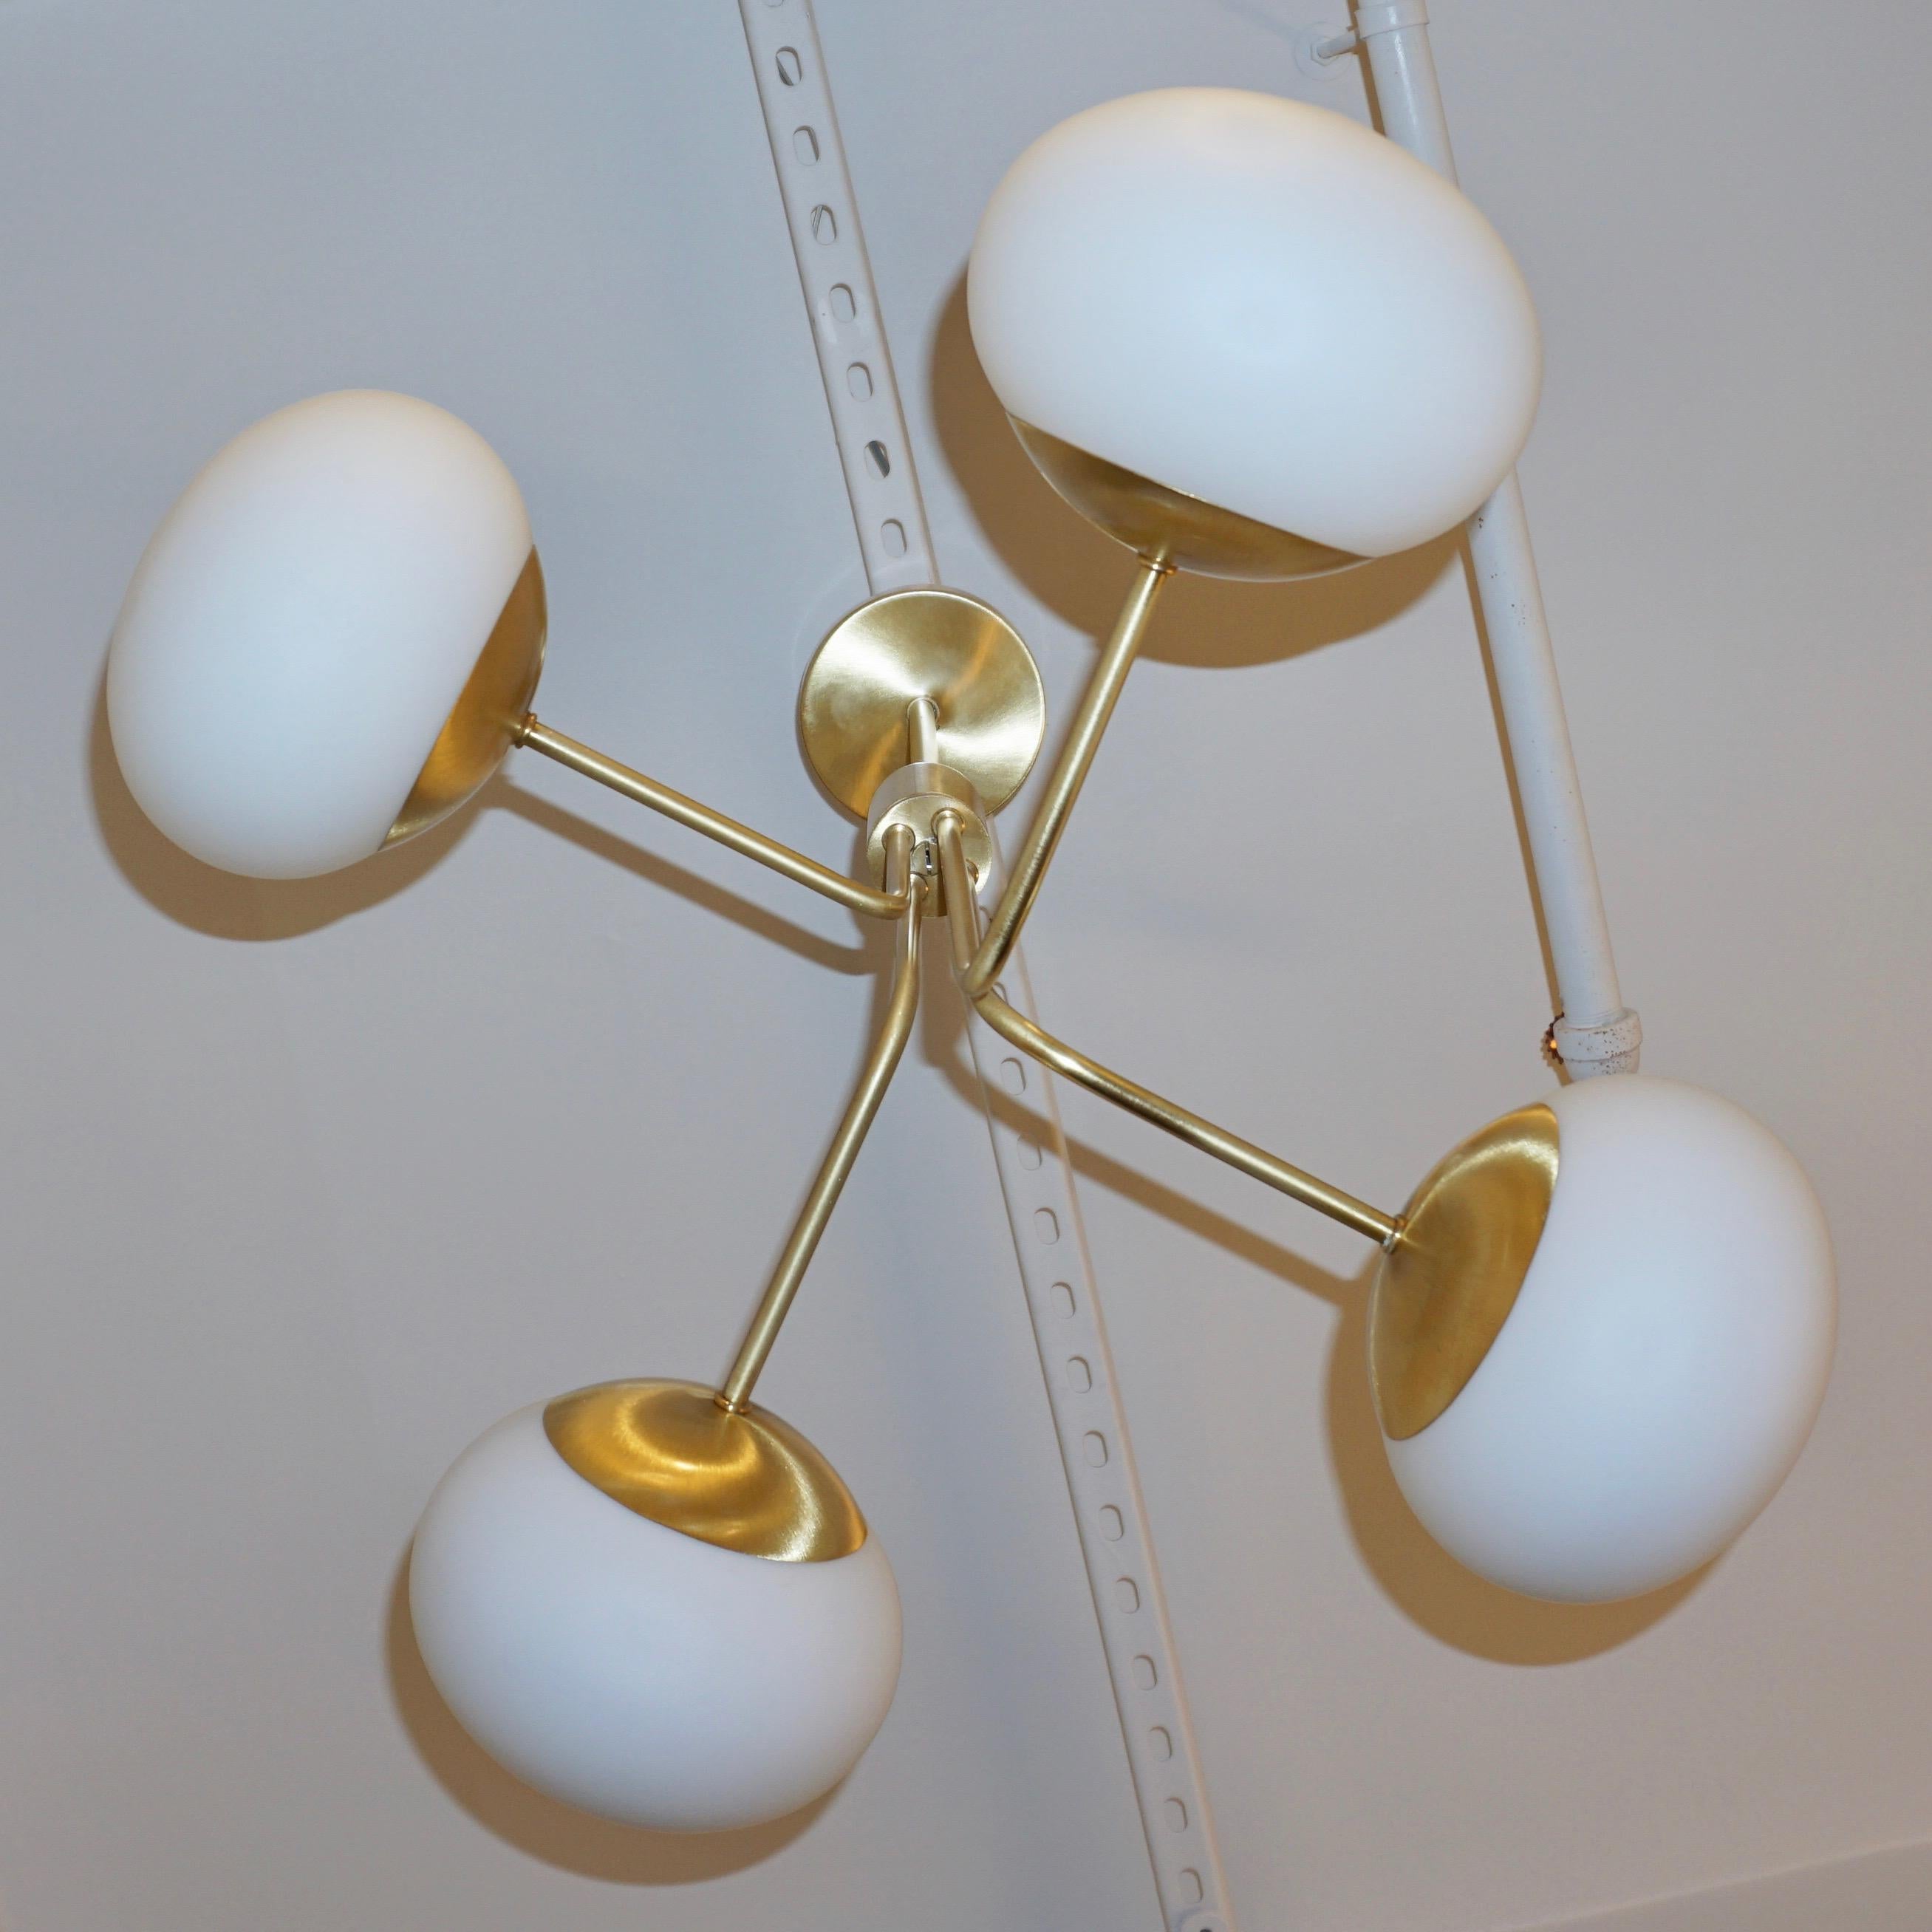 Hand-Crafted Contemporary Italian Modern Satin Brass & 4 White Murano Glass Globe Chandelier For Sale